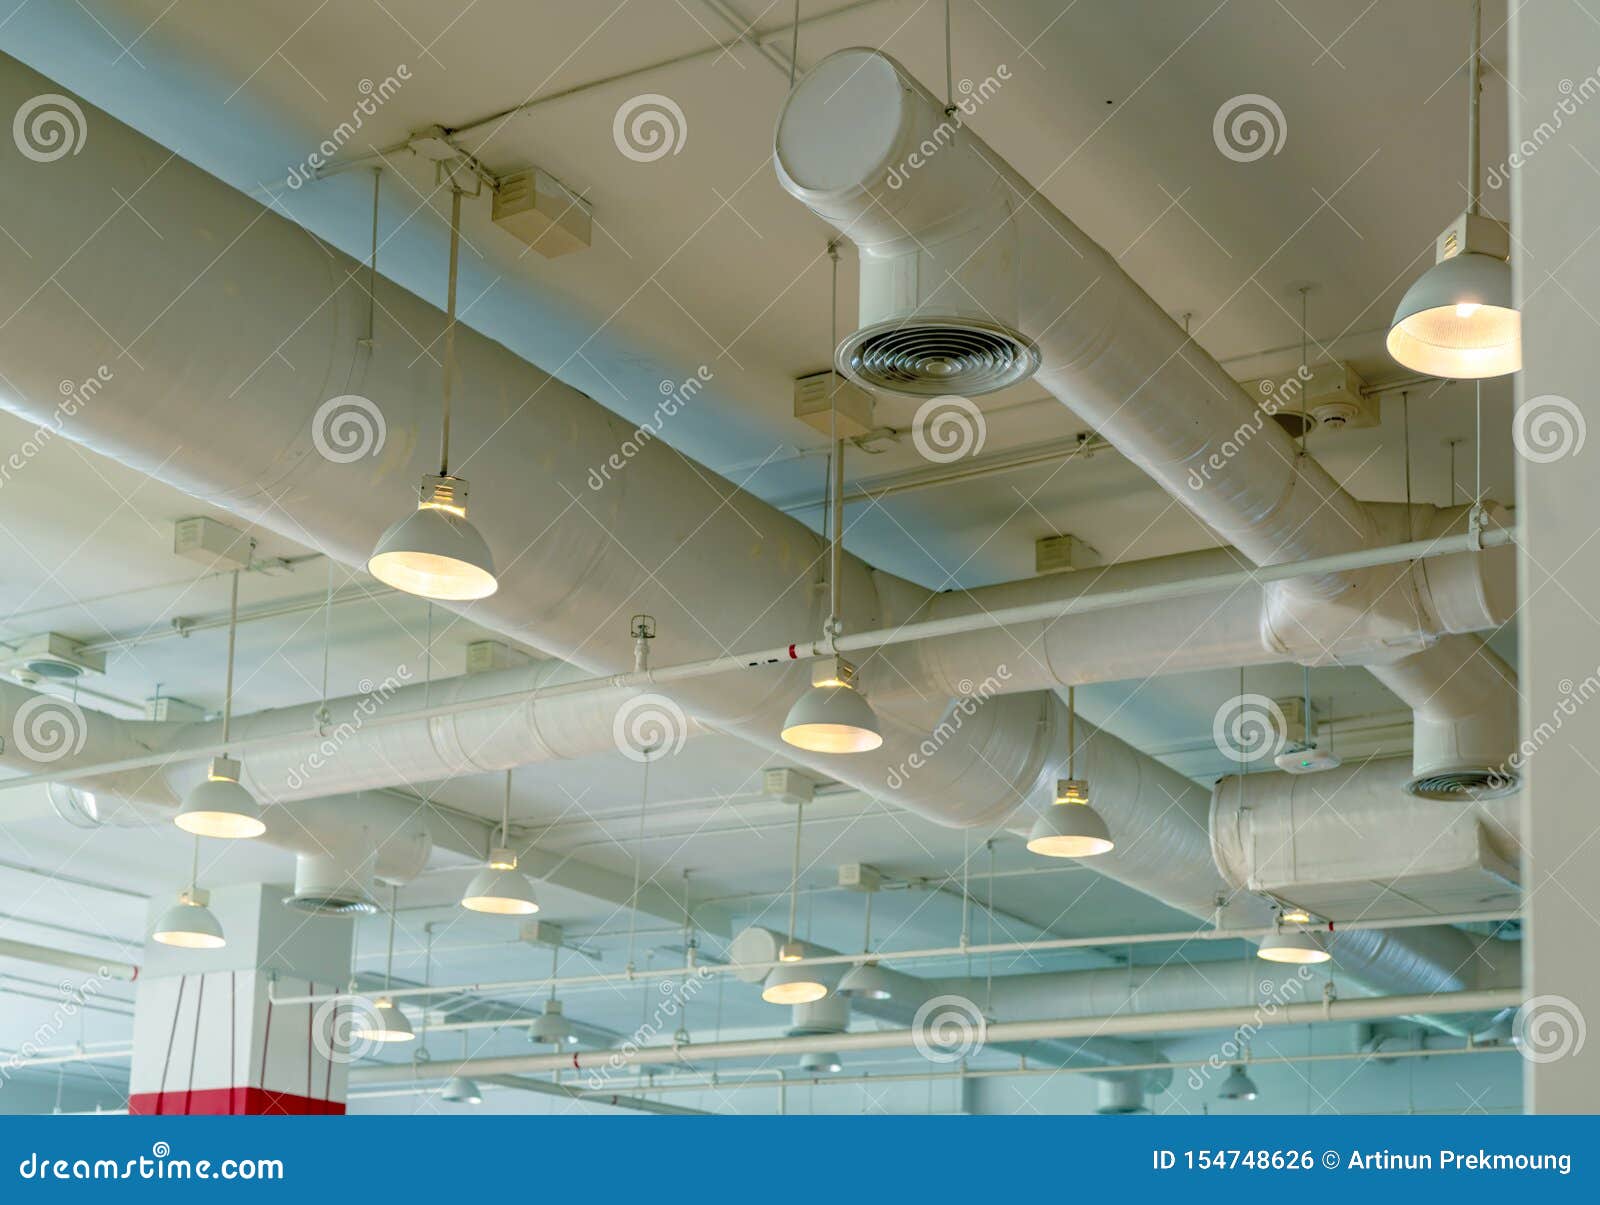 air duct, wiring and plumbing in the mall. air conditioner pipe, wiring pipe, and plumbing pipe system. ceiling lamp light with